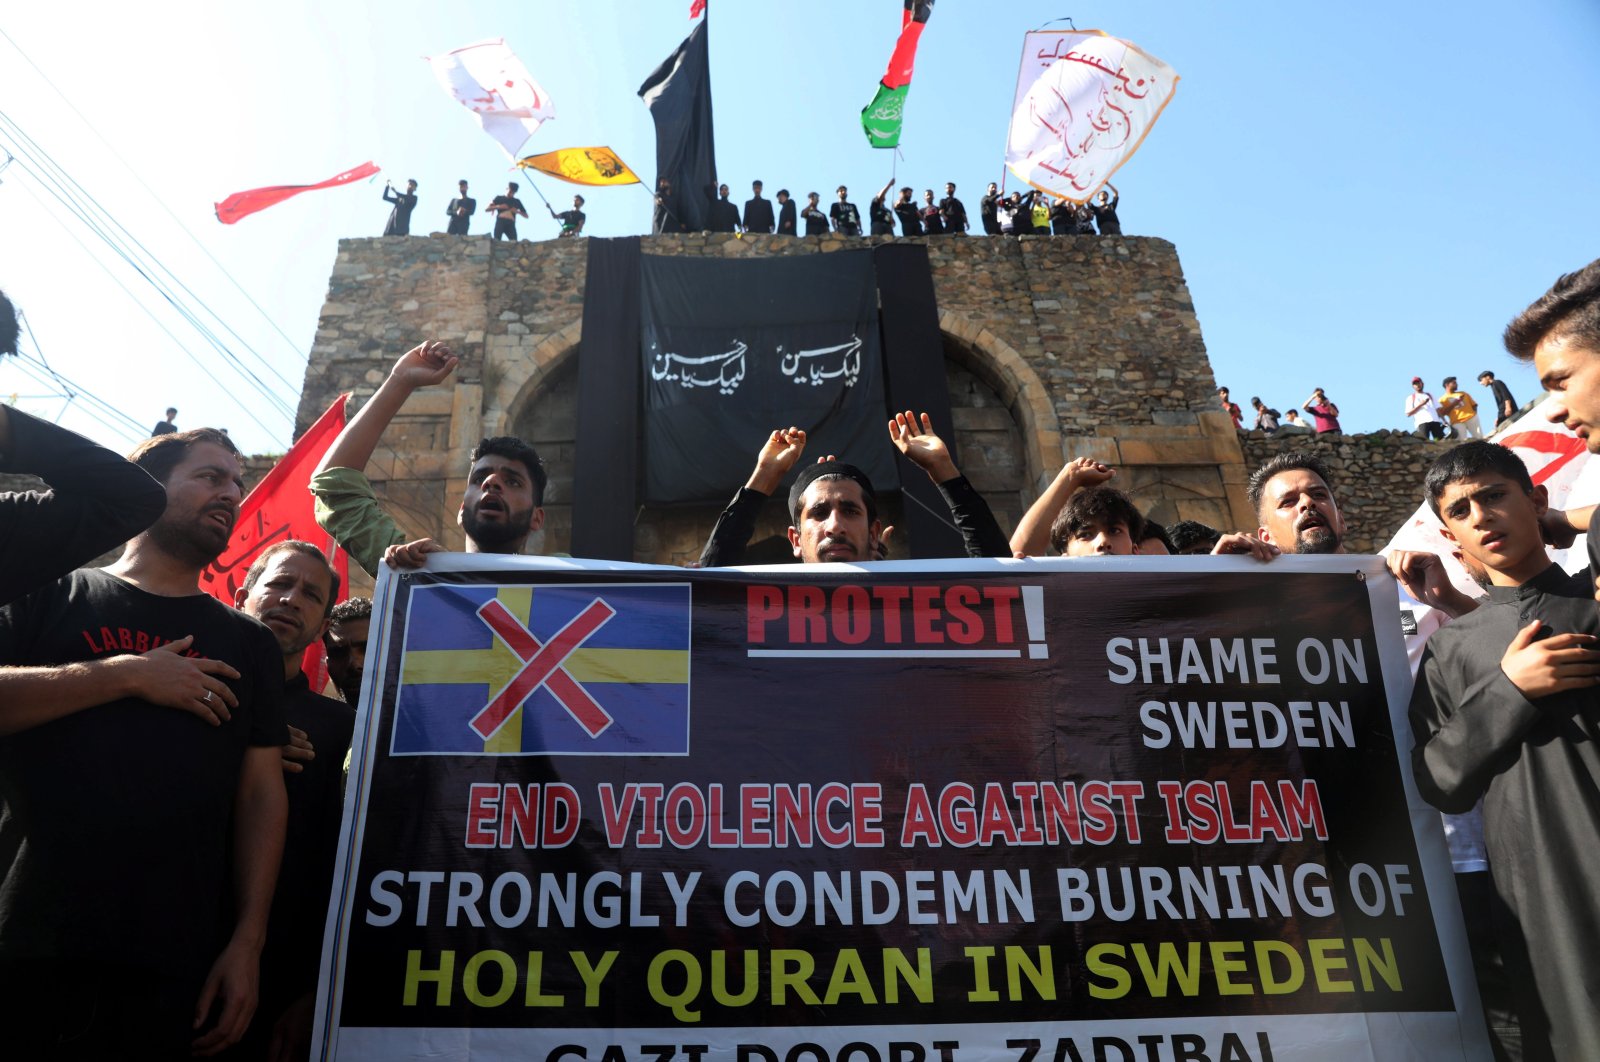 New wave of applications pour in to burn religious books in Sweden